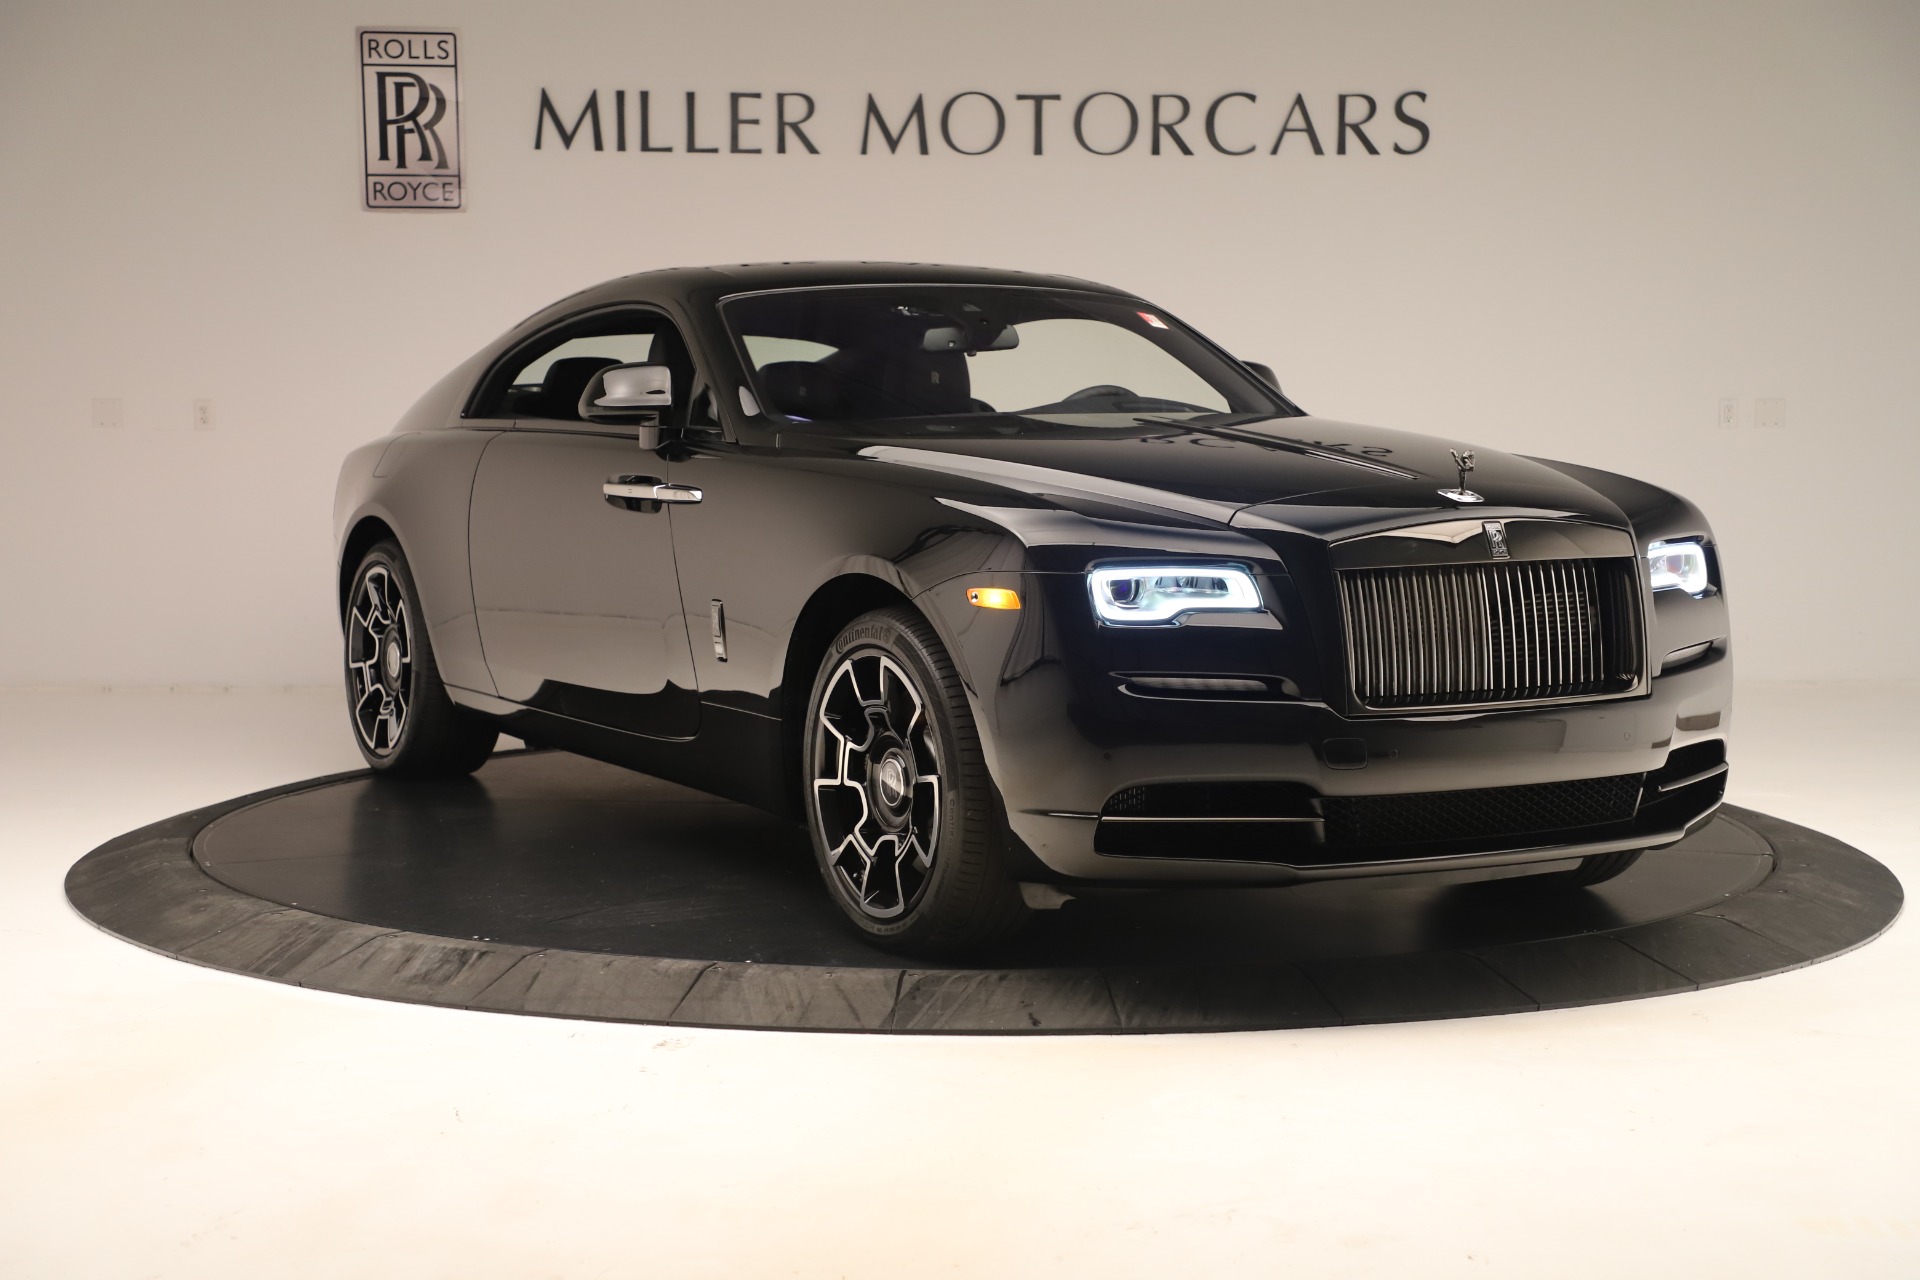 New 2020 Rolls Royce Wraith Black Badge For Sale Special Pricing